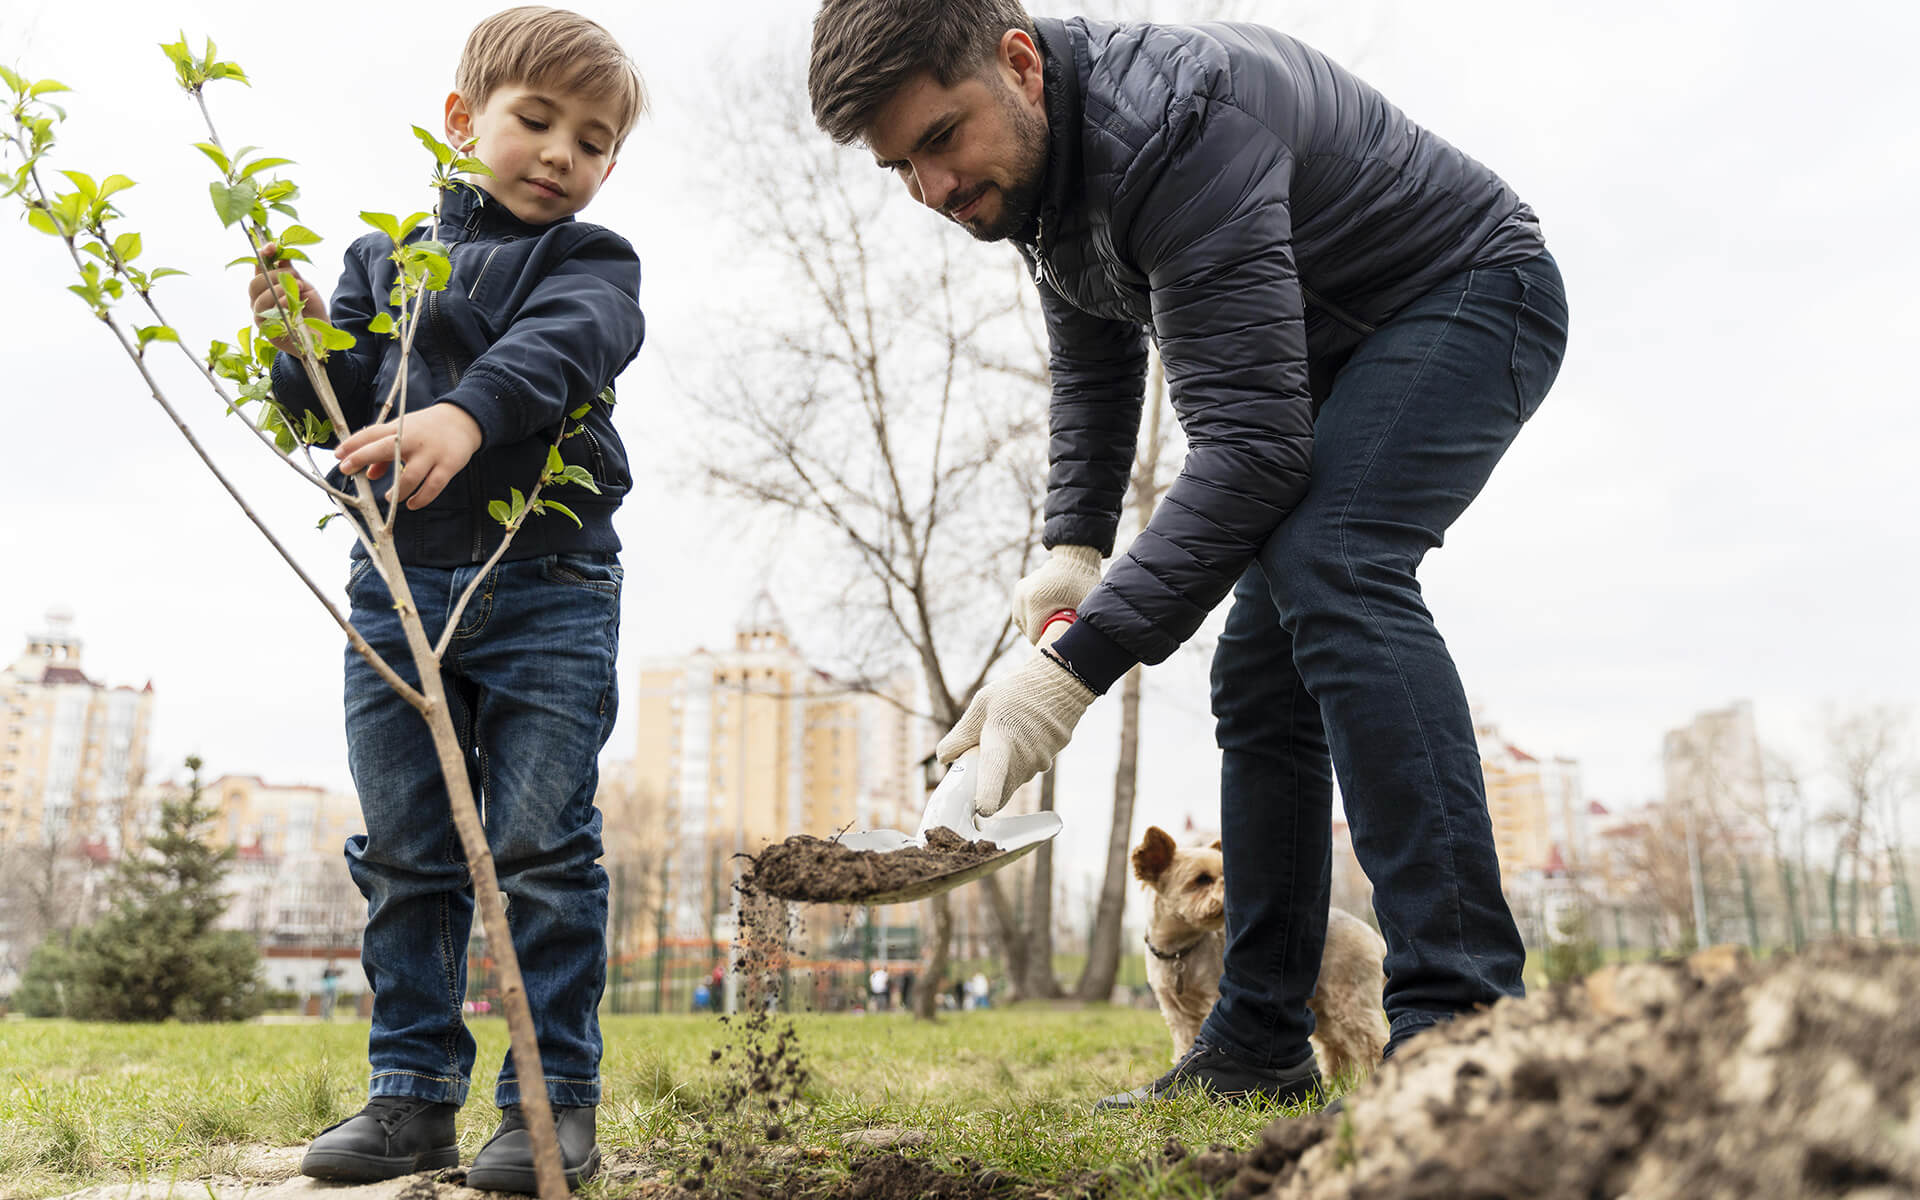 Project: Planting 300 trees in the city